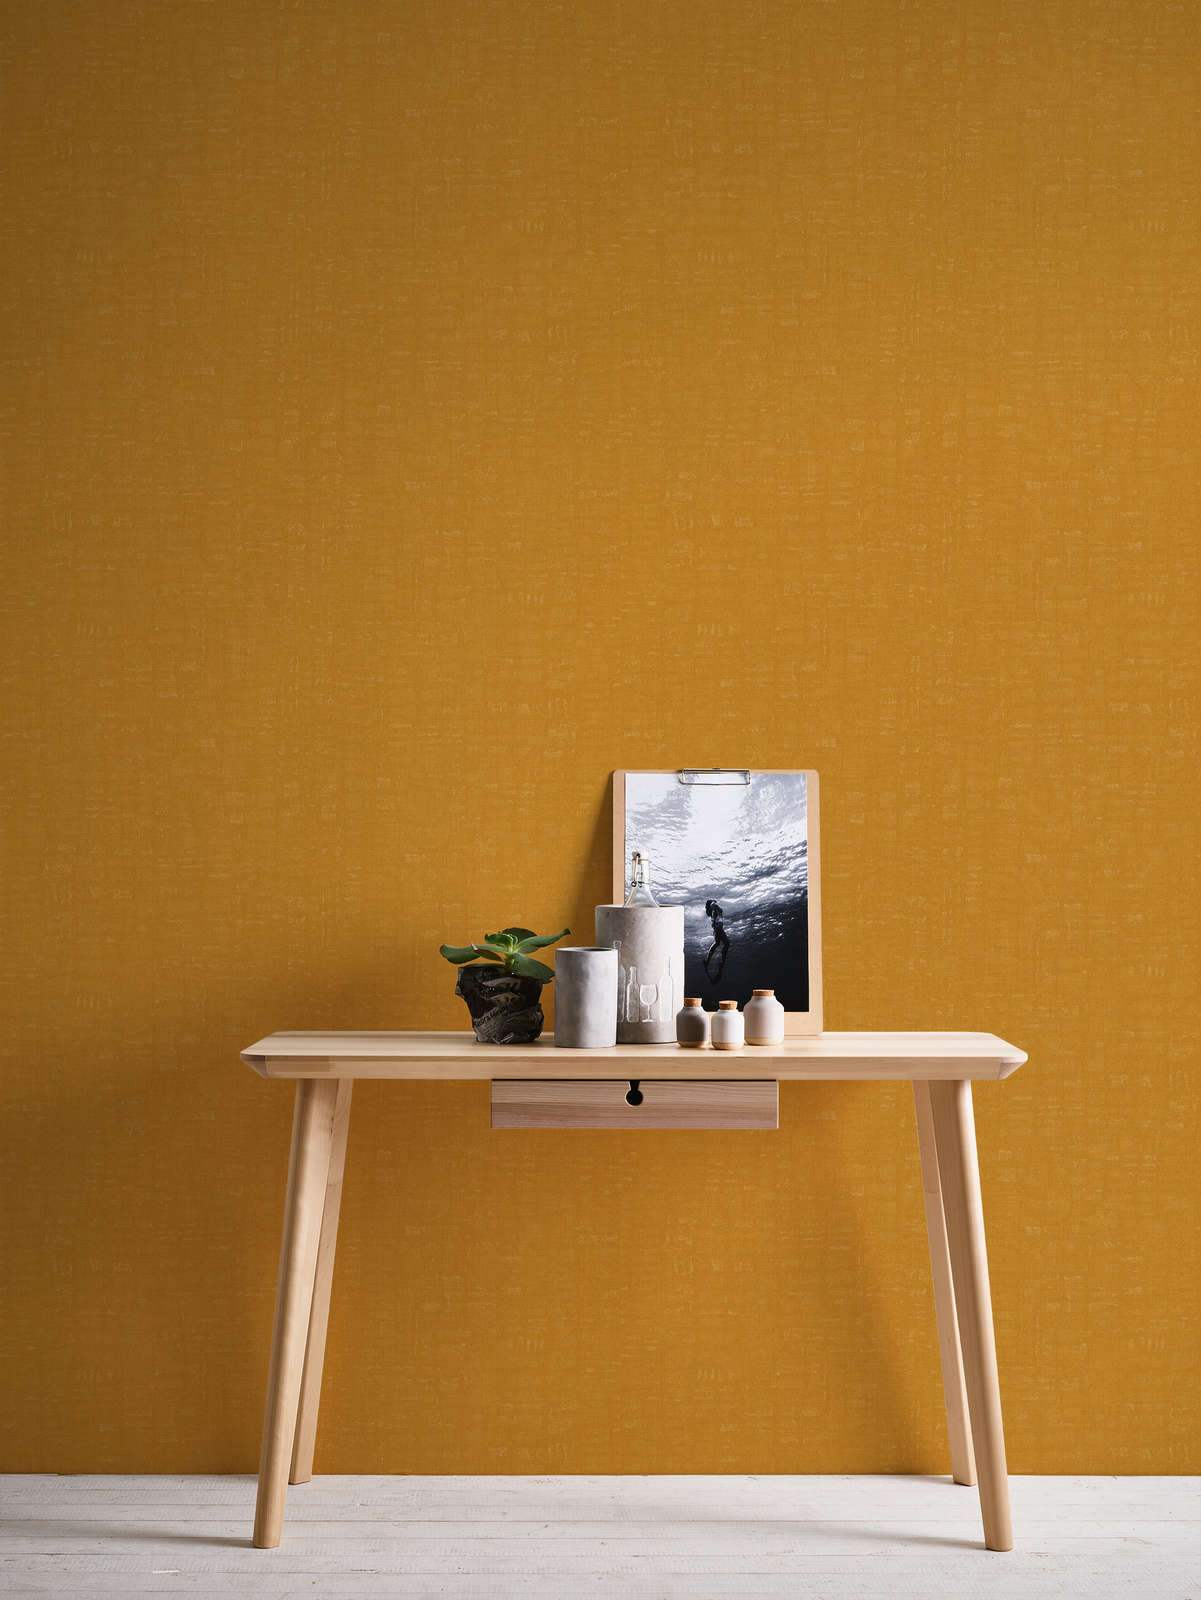             Non-woven wallpaper plain with mottled effect - yellow
        